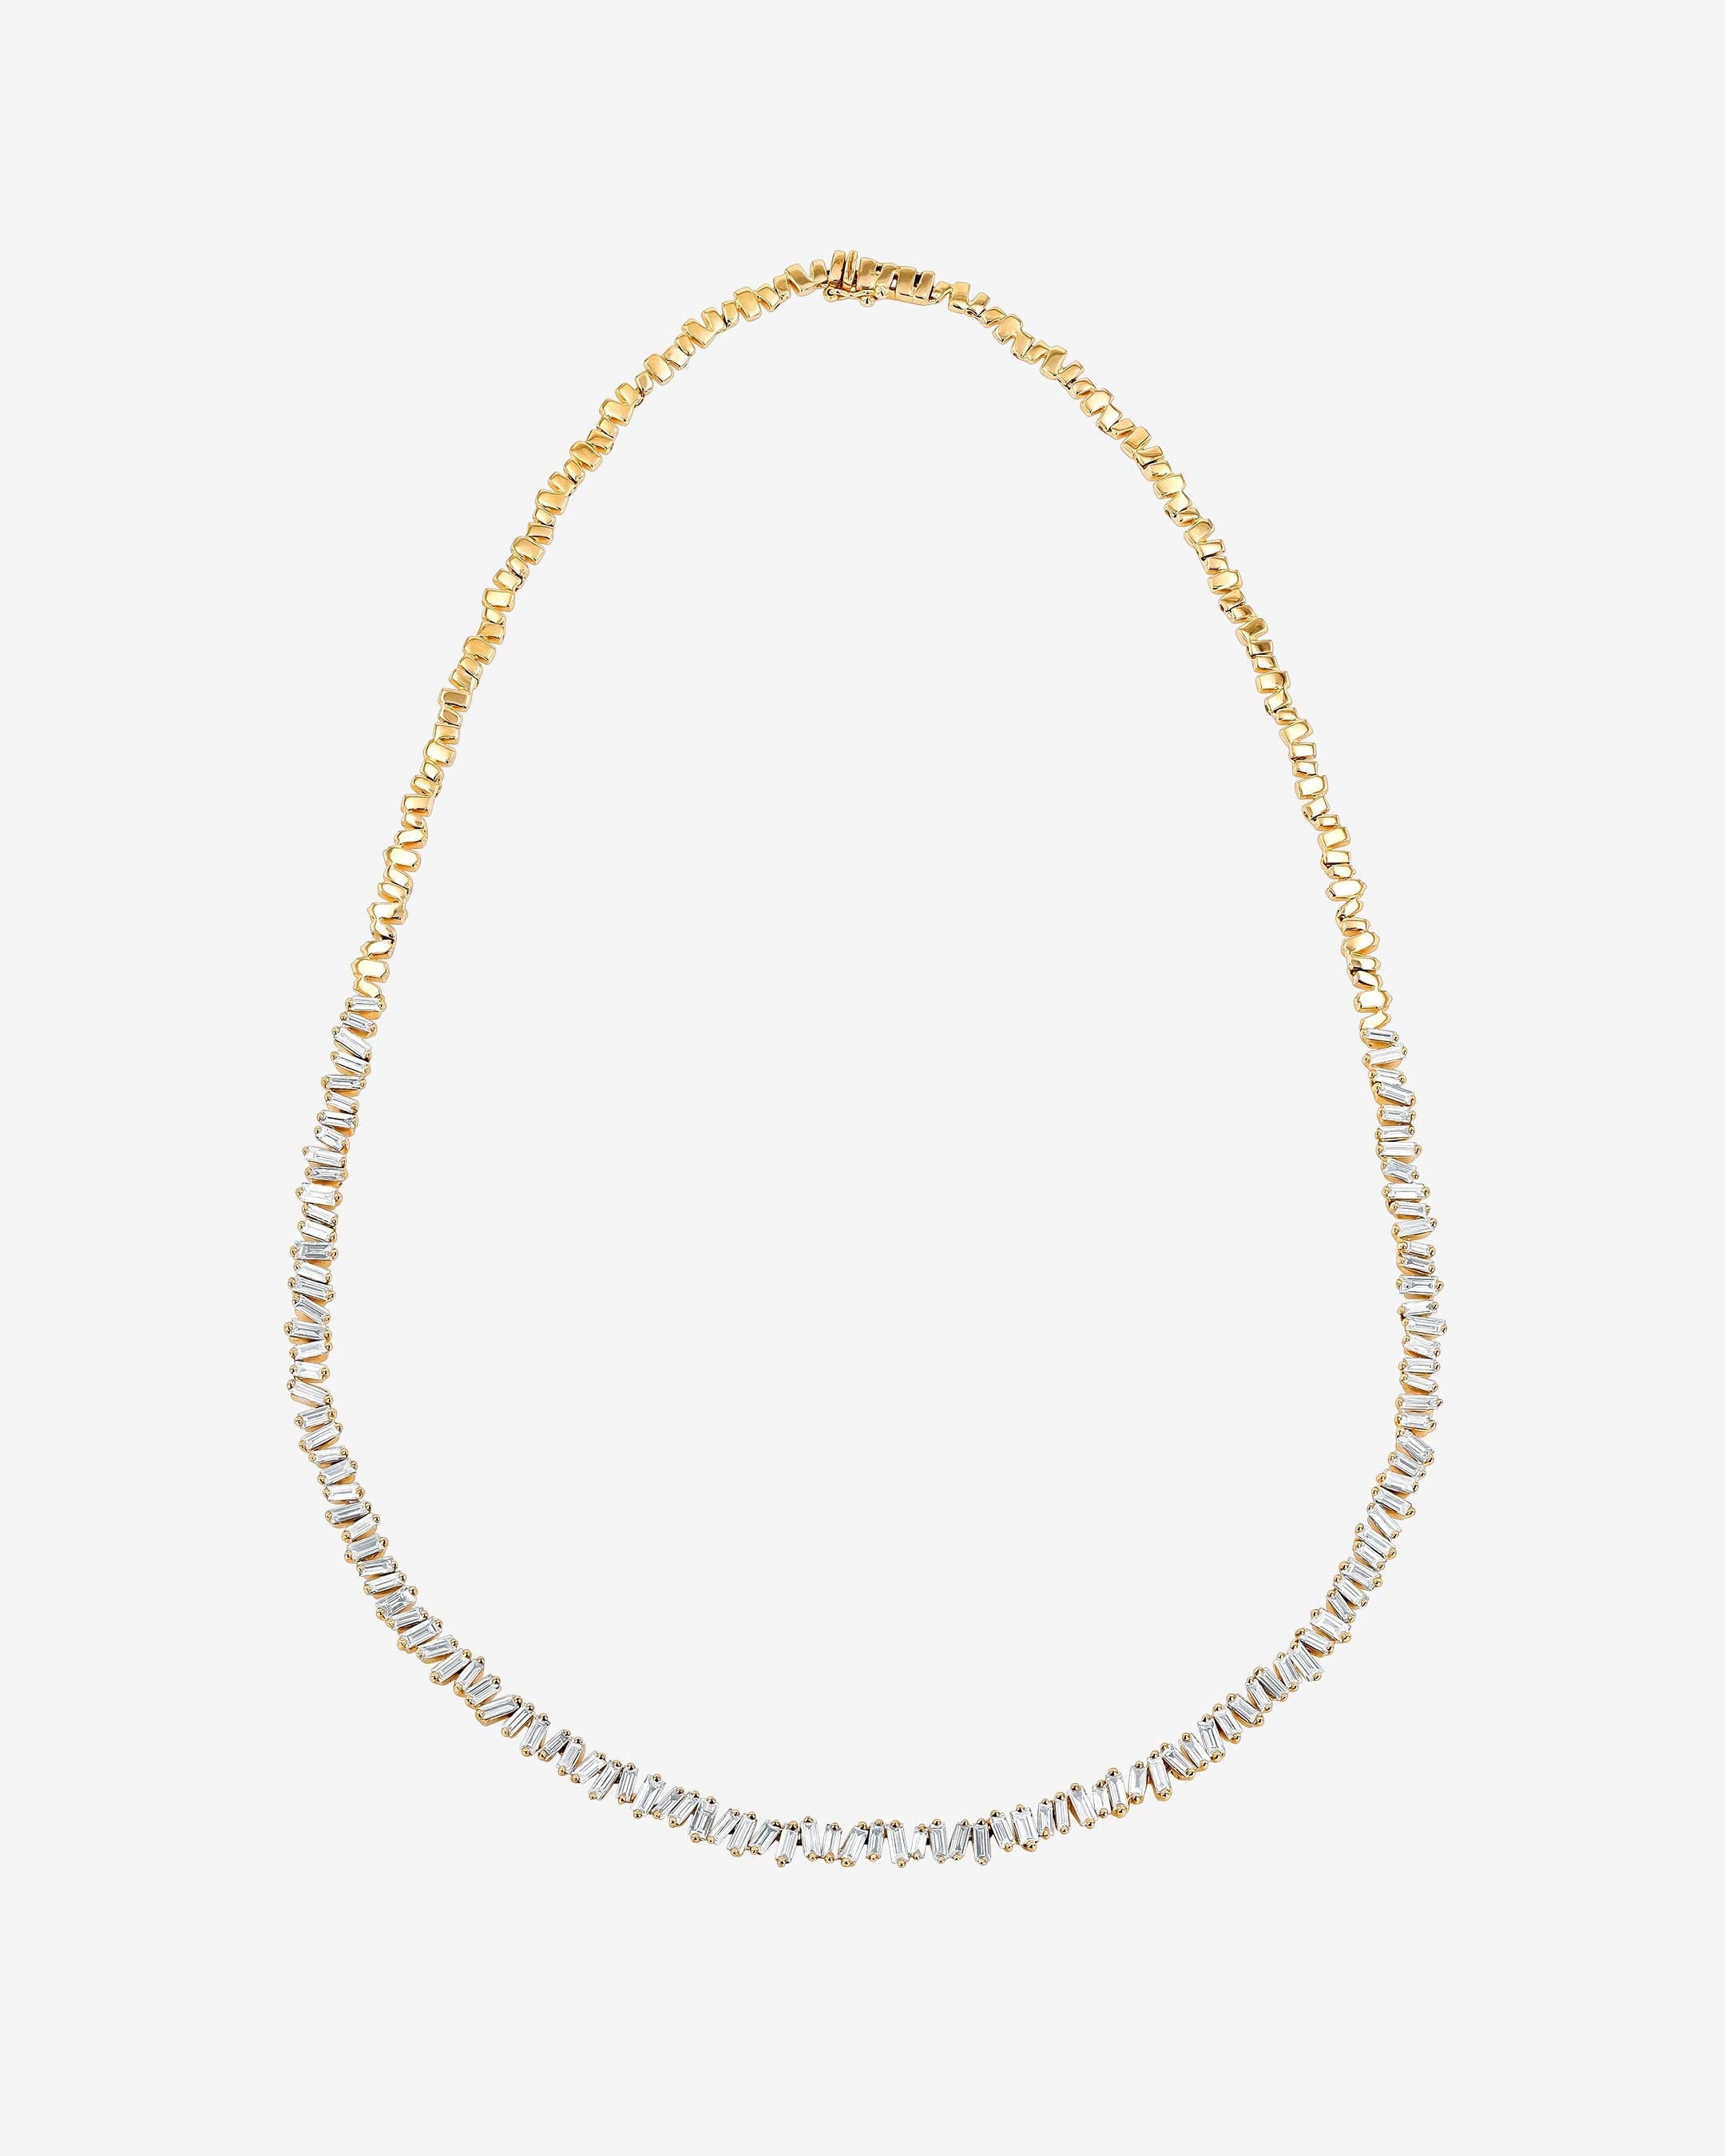 Suzanne Kalan Classic Diamond Tennis Necklace in 18k yellow gold